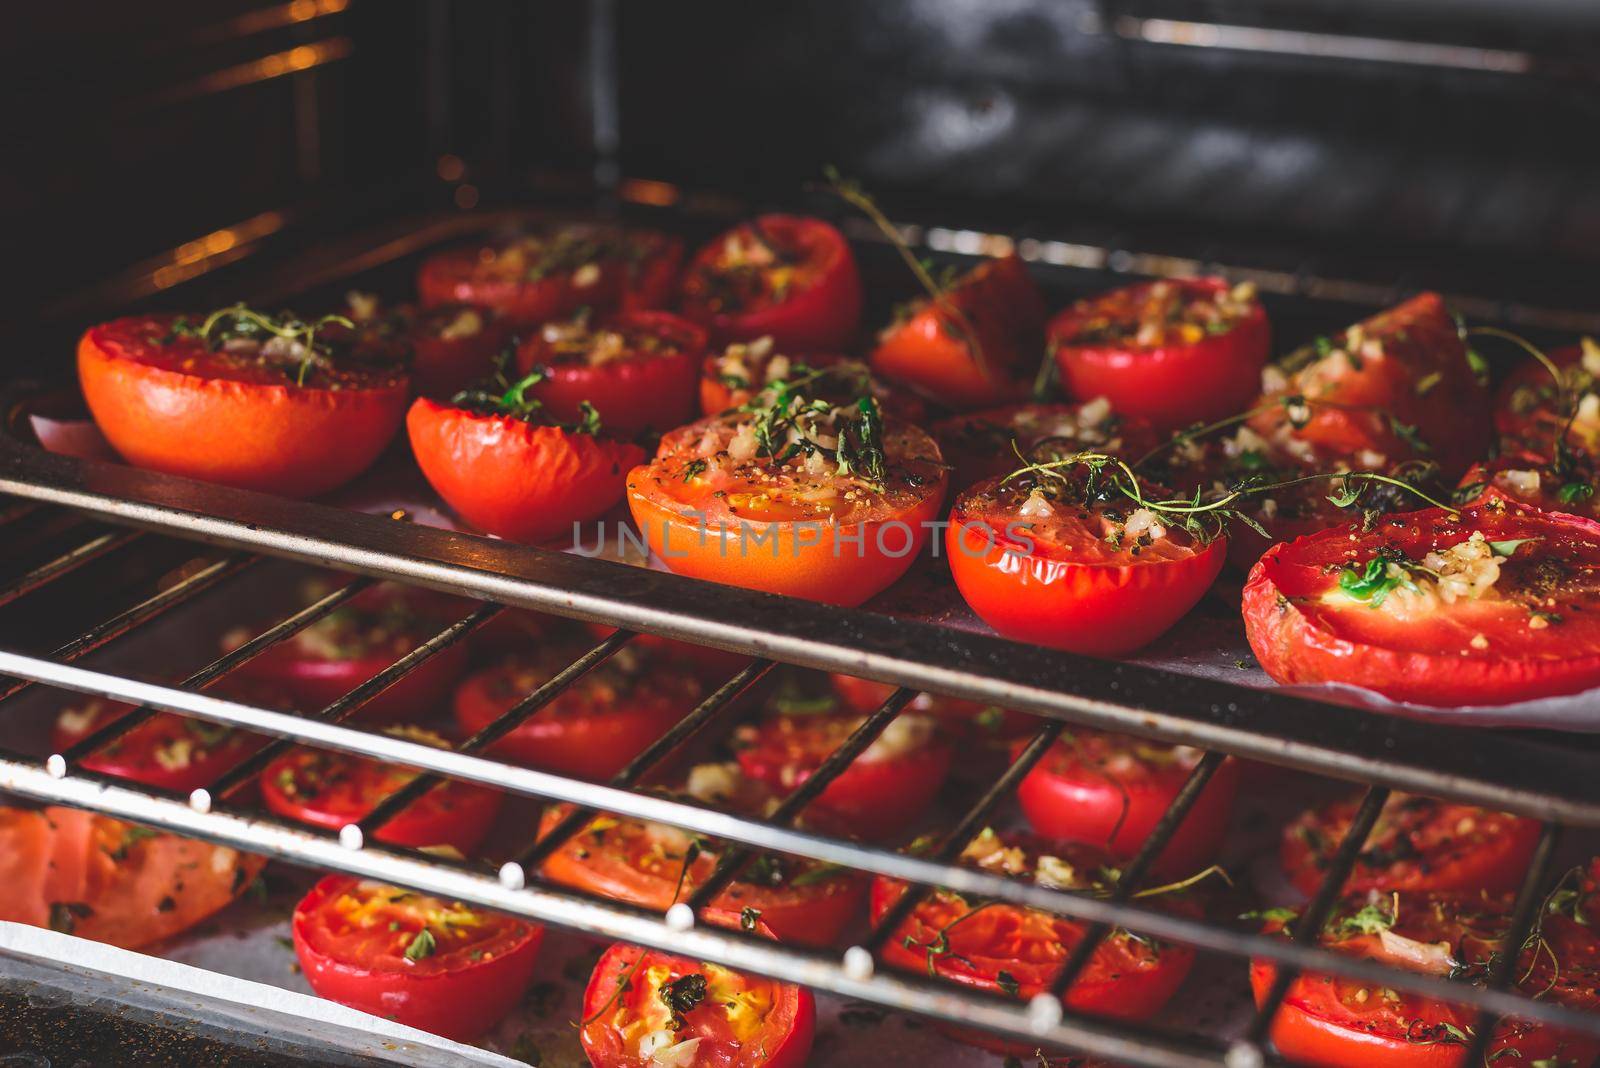 Baking Tomatoes with Herbs and Garlic in Oven by Seva_blsv